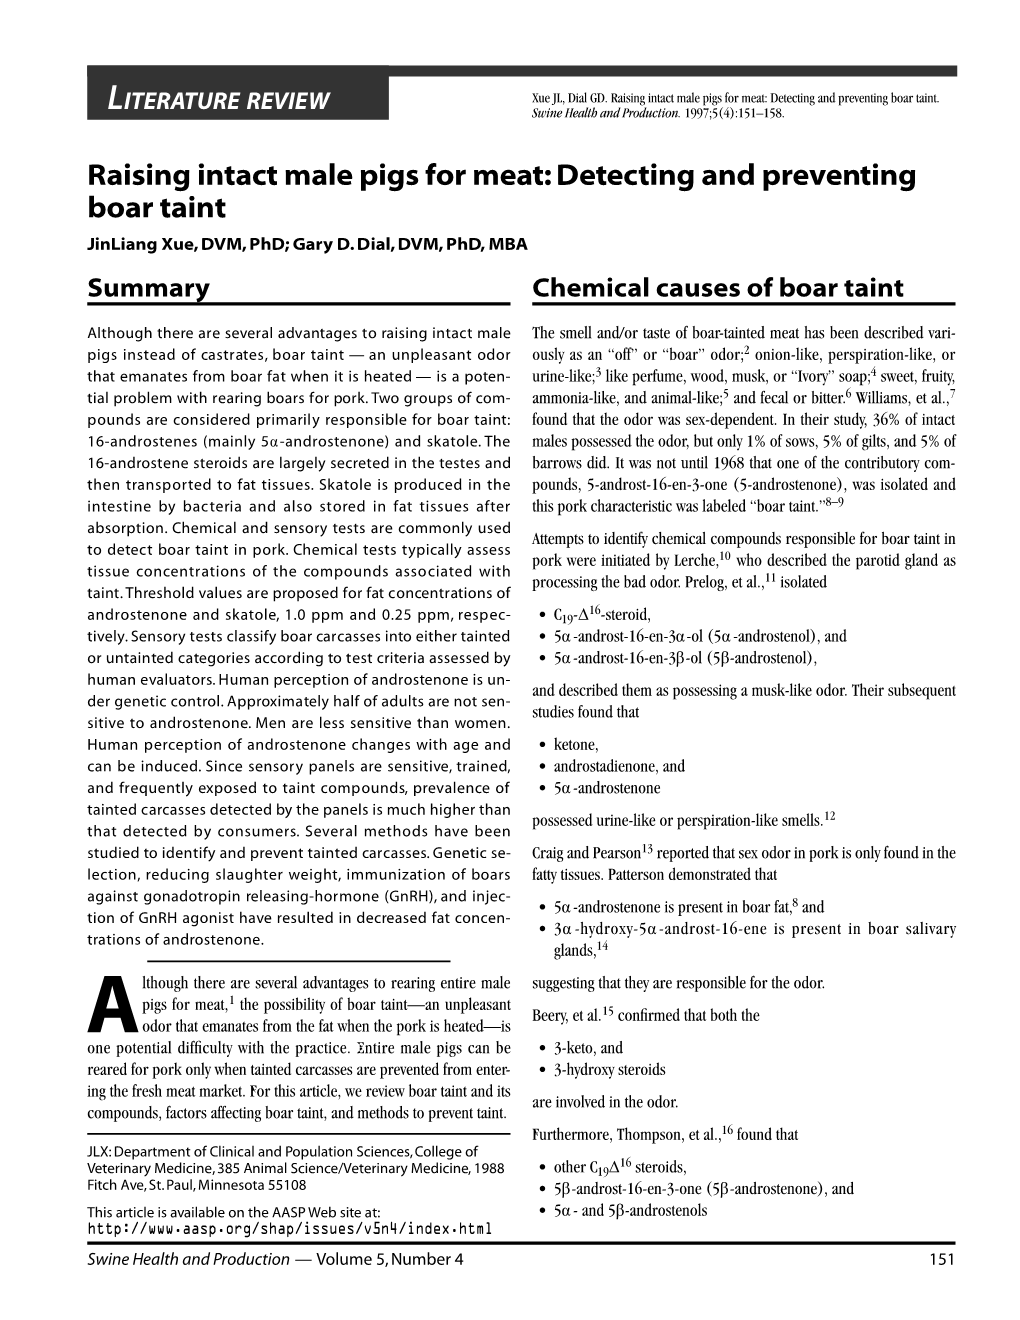 Raising Intact Male Pigs for Meat: Detecting and Preventing Boar Taint